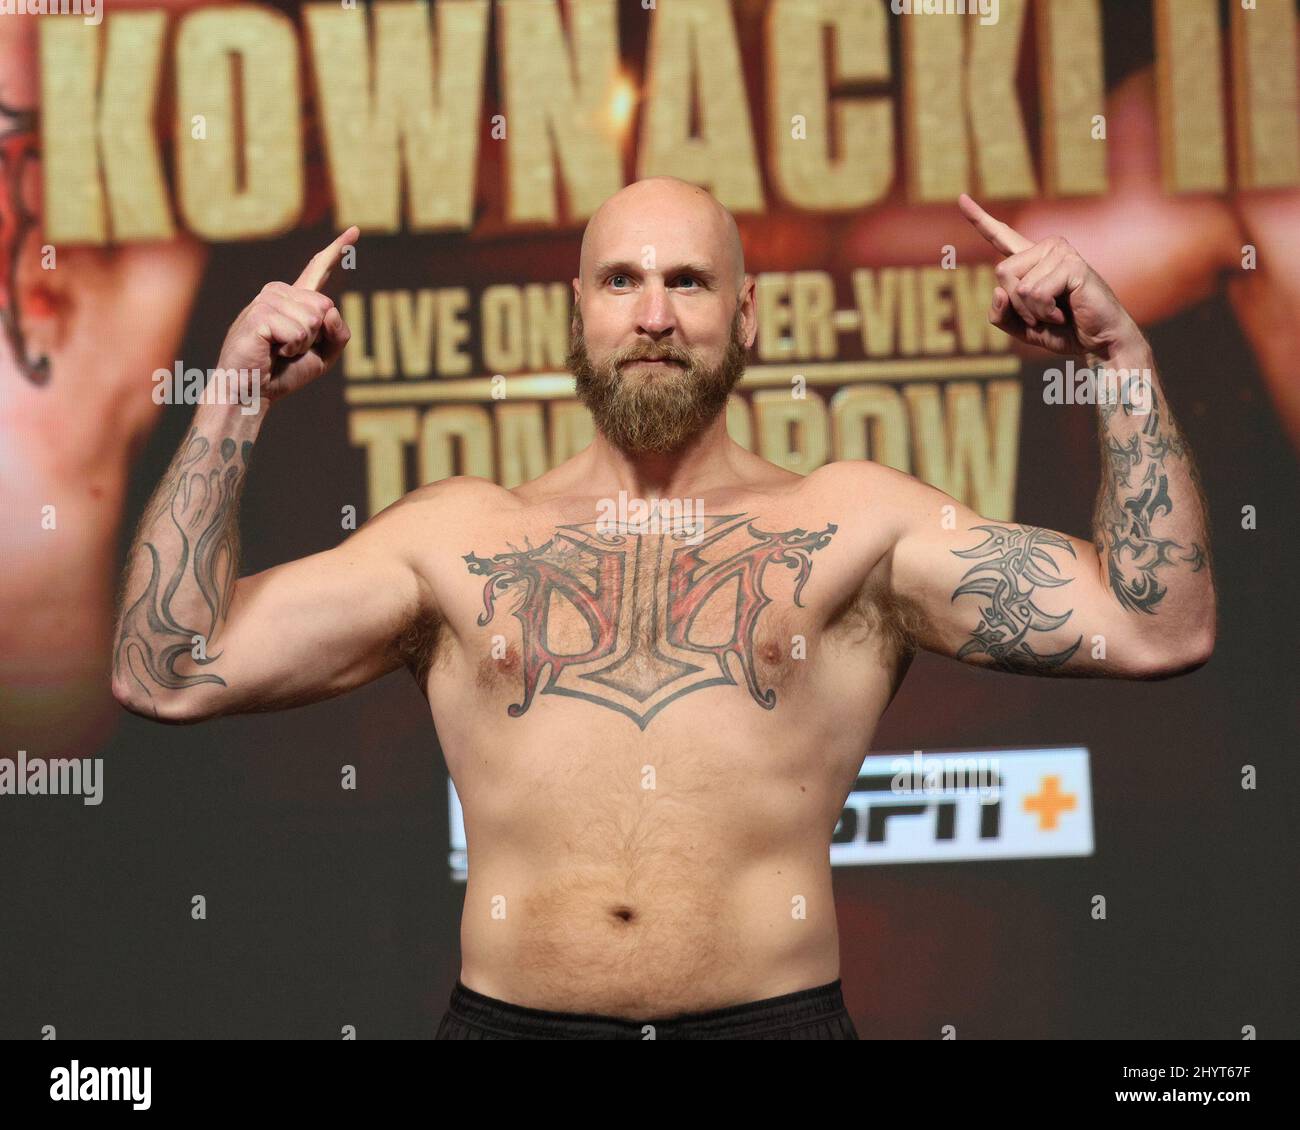 Robert Helenius on stage during the weigh-in for the Tyson Fury vs Deontay Wilder III World Heavyweight Championship fight at the MGM Grand Garden Arena on October 8, 2021 in Las Vegas,